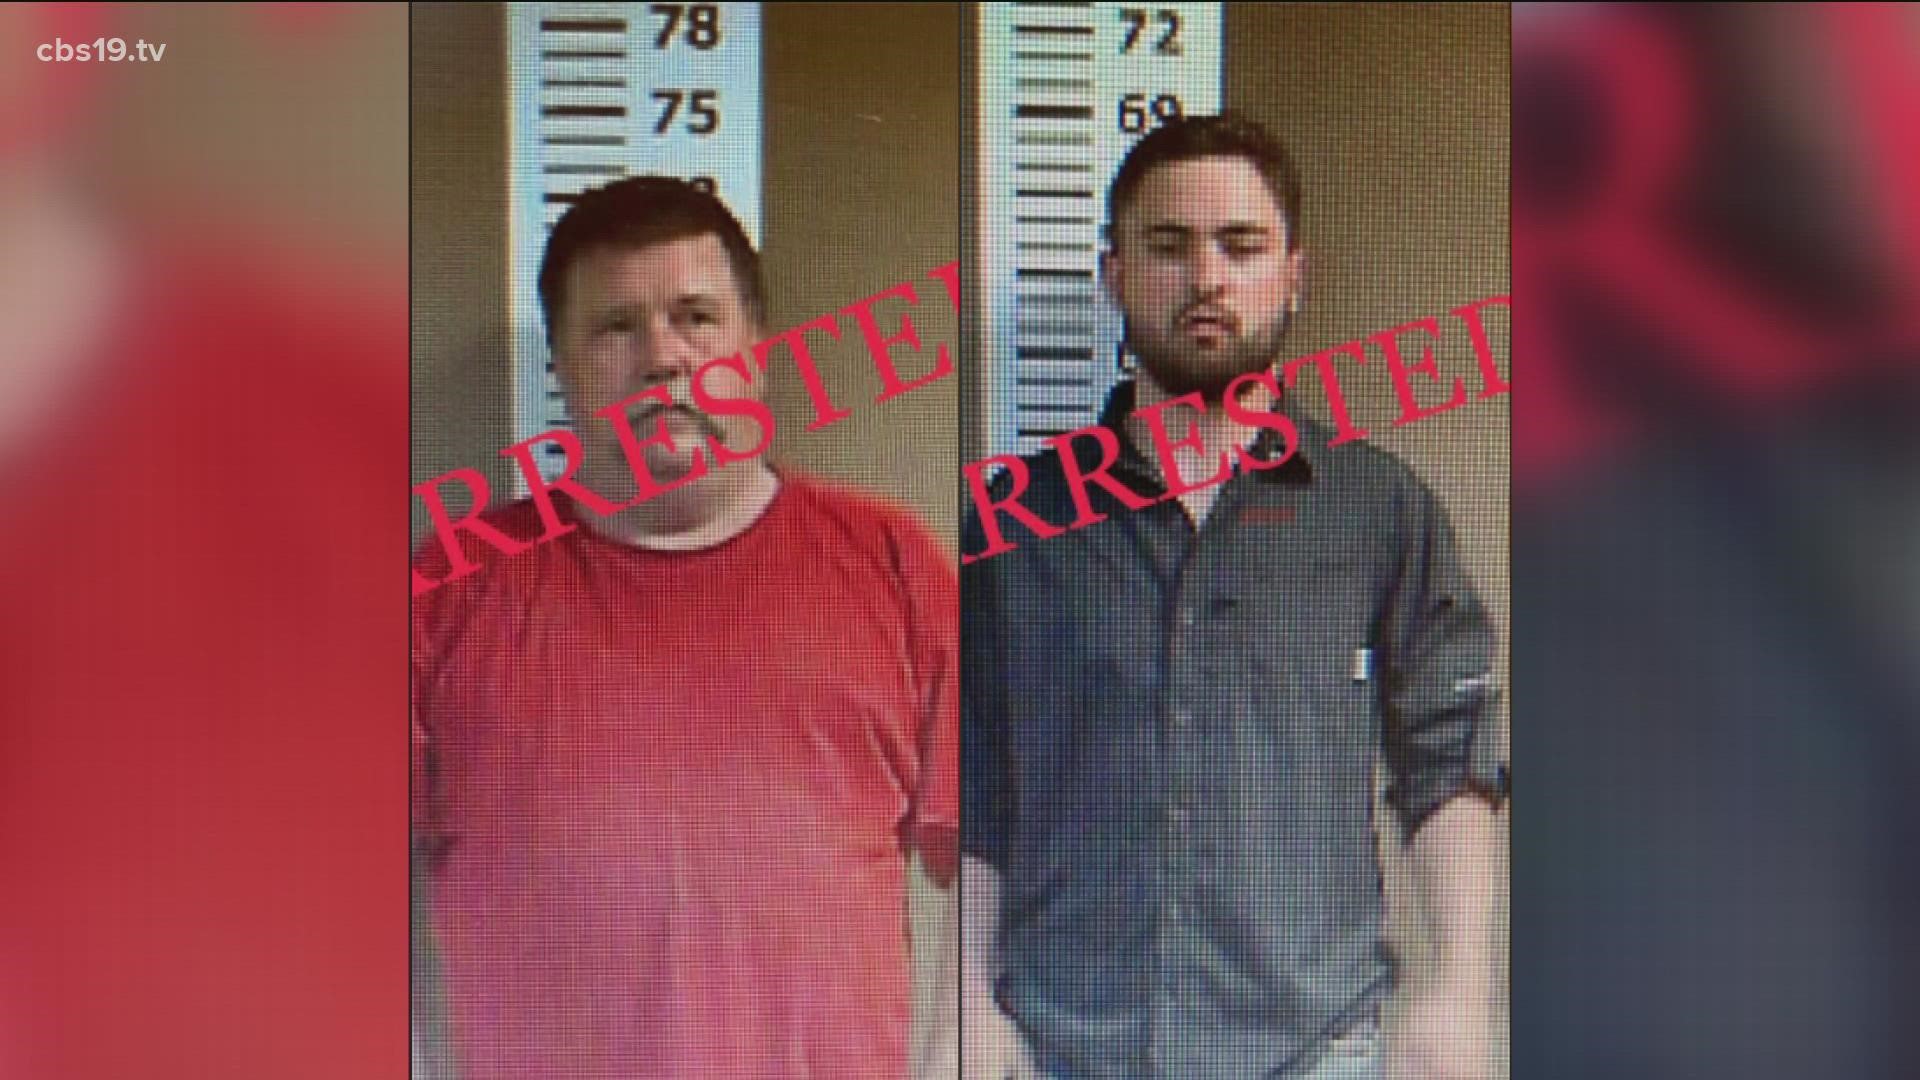 Bo Brevard, 23, and Danny Kirkland, 50, both of Deberry, were arrested for theft of property between $30,000 and $150,000.